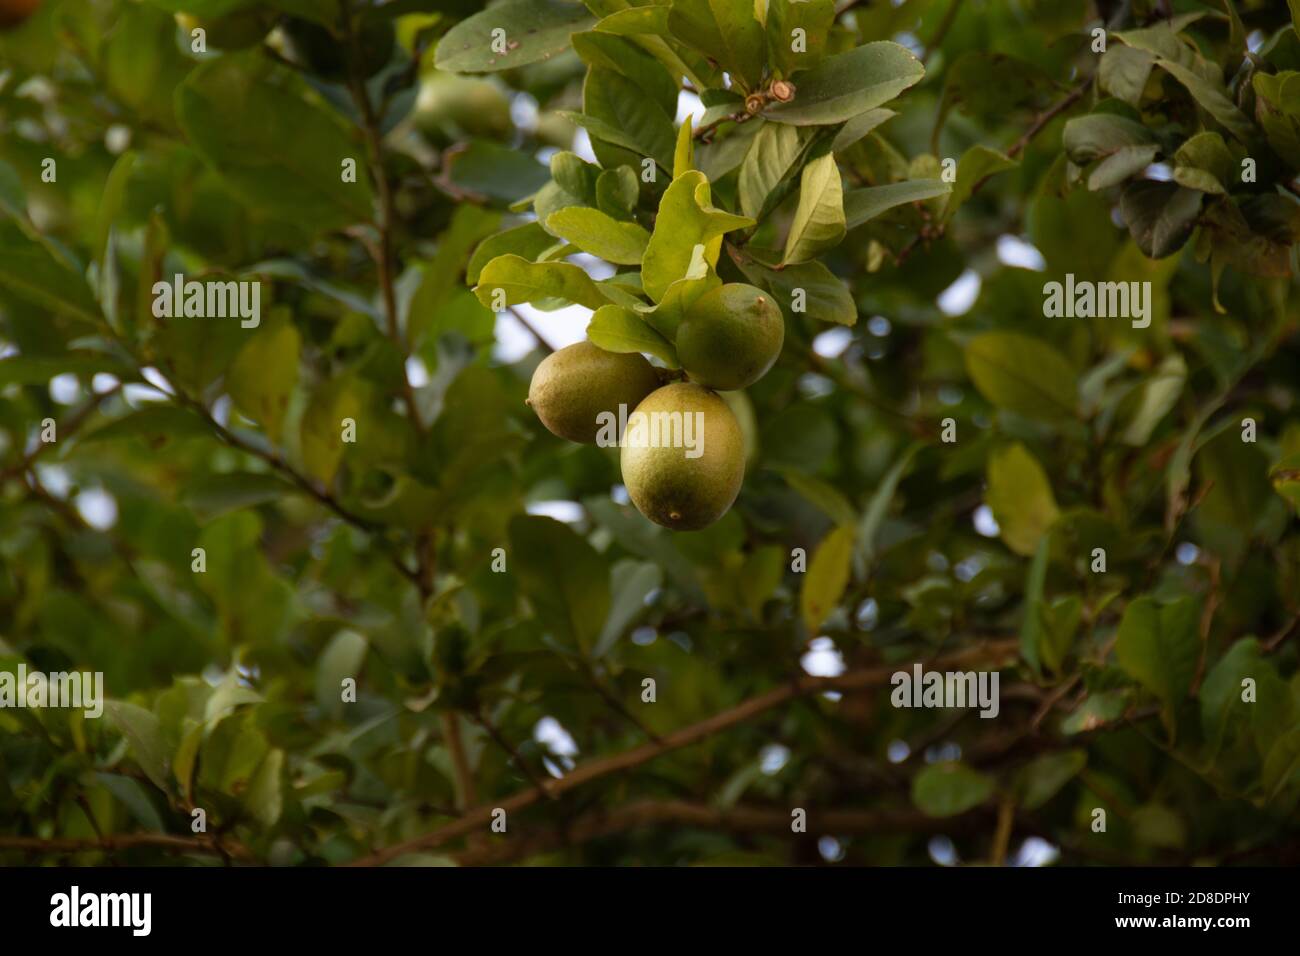 The lemon, Citrus limon, is a species of small evergreen tree in the flowering plant family Rutaceae, native to South Asia, primarily North eastern In Stock Photo